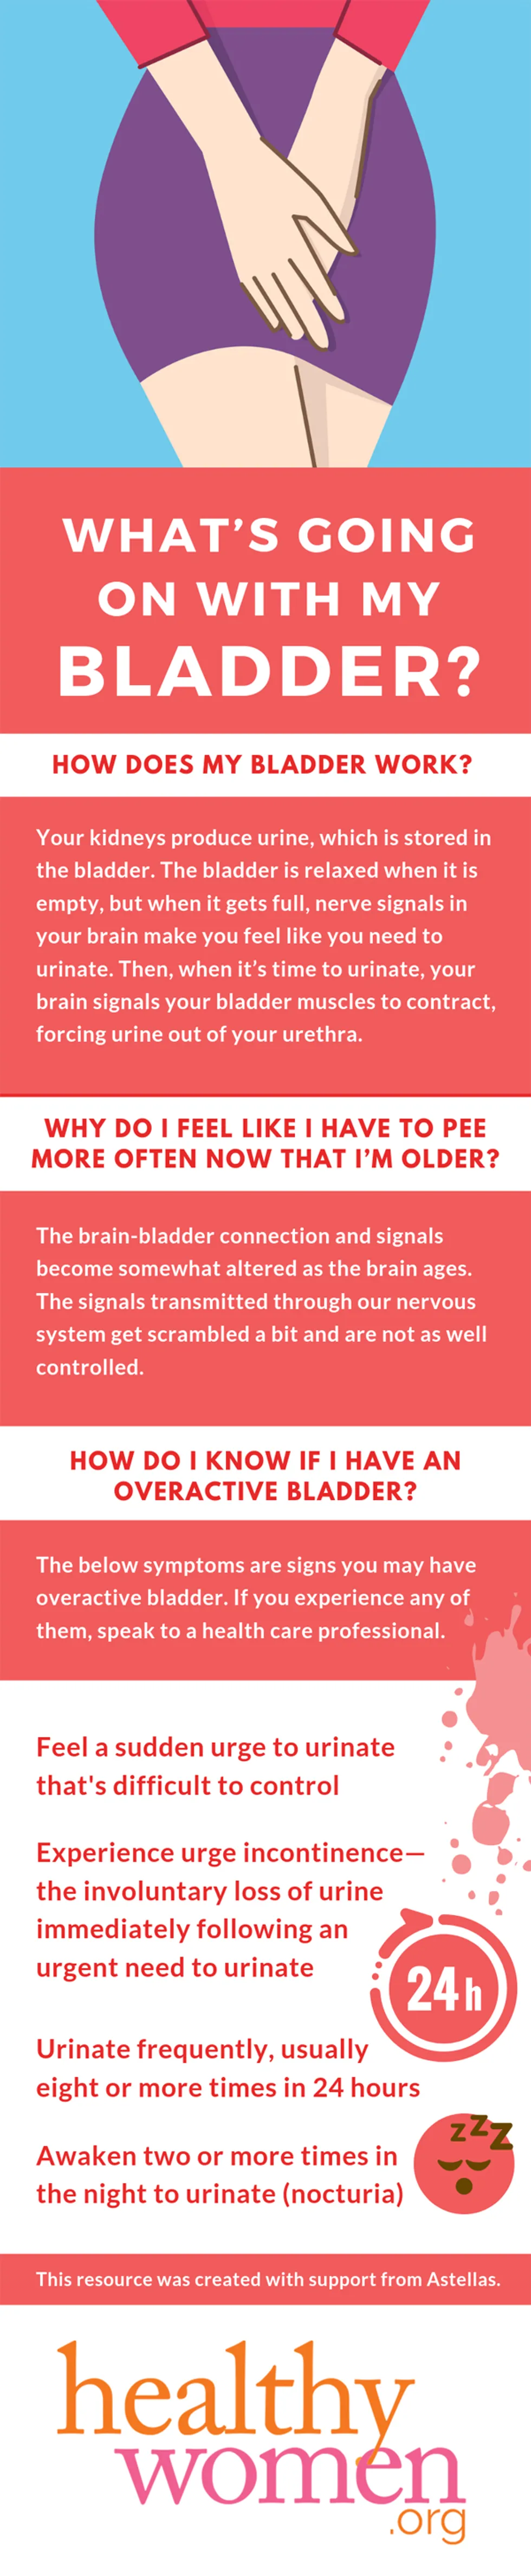 What Causes Overactive Bladder? - HealthyWomen